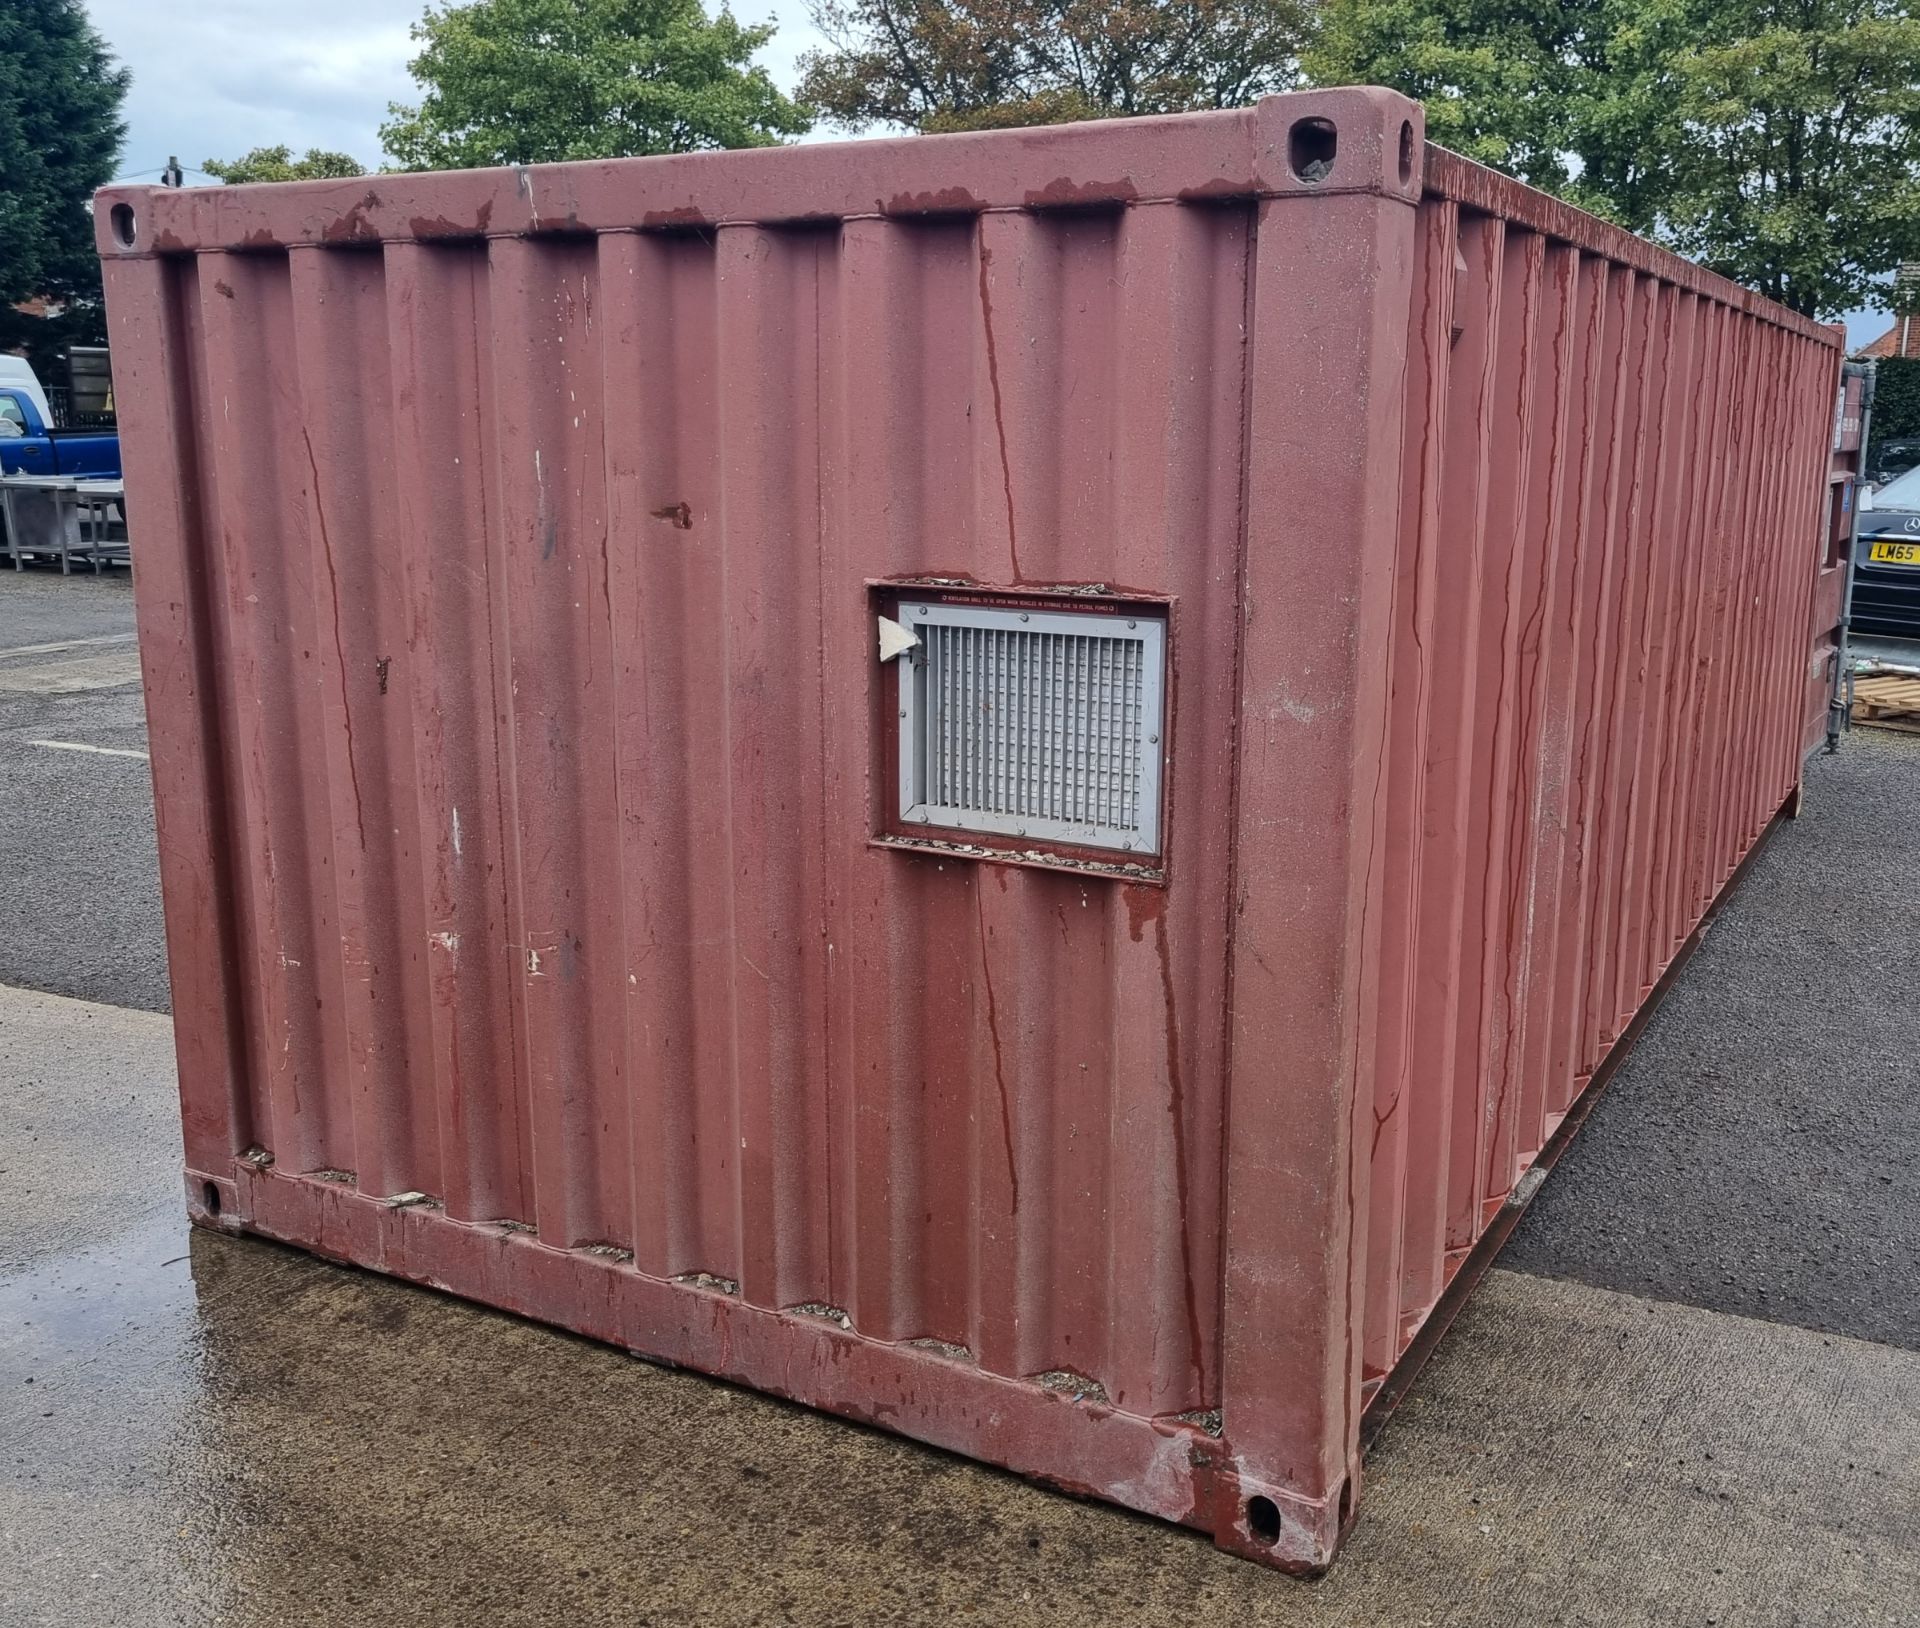 Stonehaven Engineering Ltd transportable storage container ISO 499/99/01 - dimensions: 20ft x 8ft x - Bild 2 aus 6